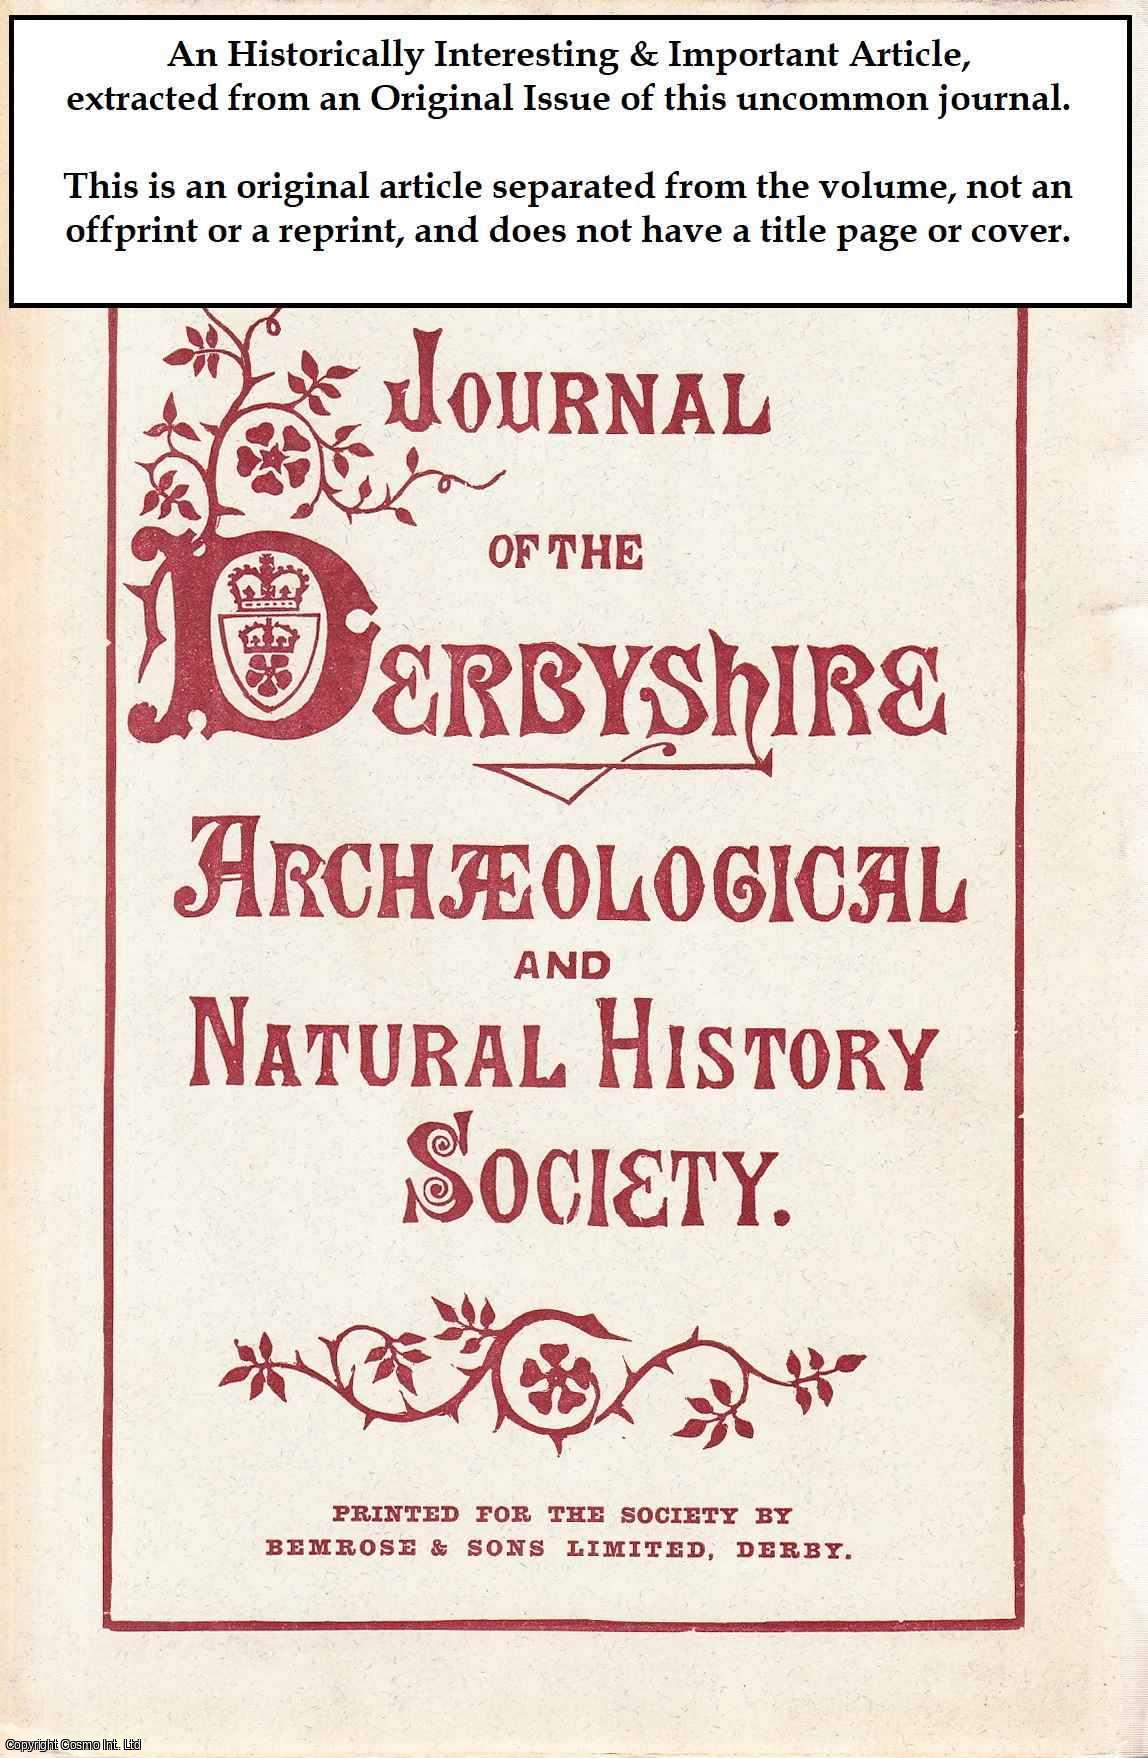 J. Charles Cox - Duffield Castle: Its History, Site, and Recently Found Remains: with some Account of The Seven Earl Ferrers who Held it. An original article from the Journal of the Derbyshire Archaeological & Natural History Society, 1887.